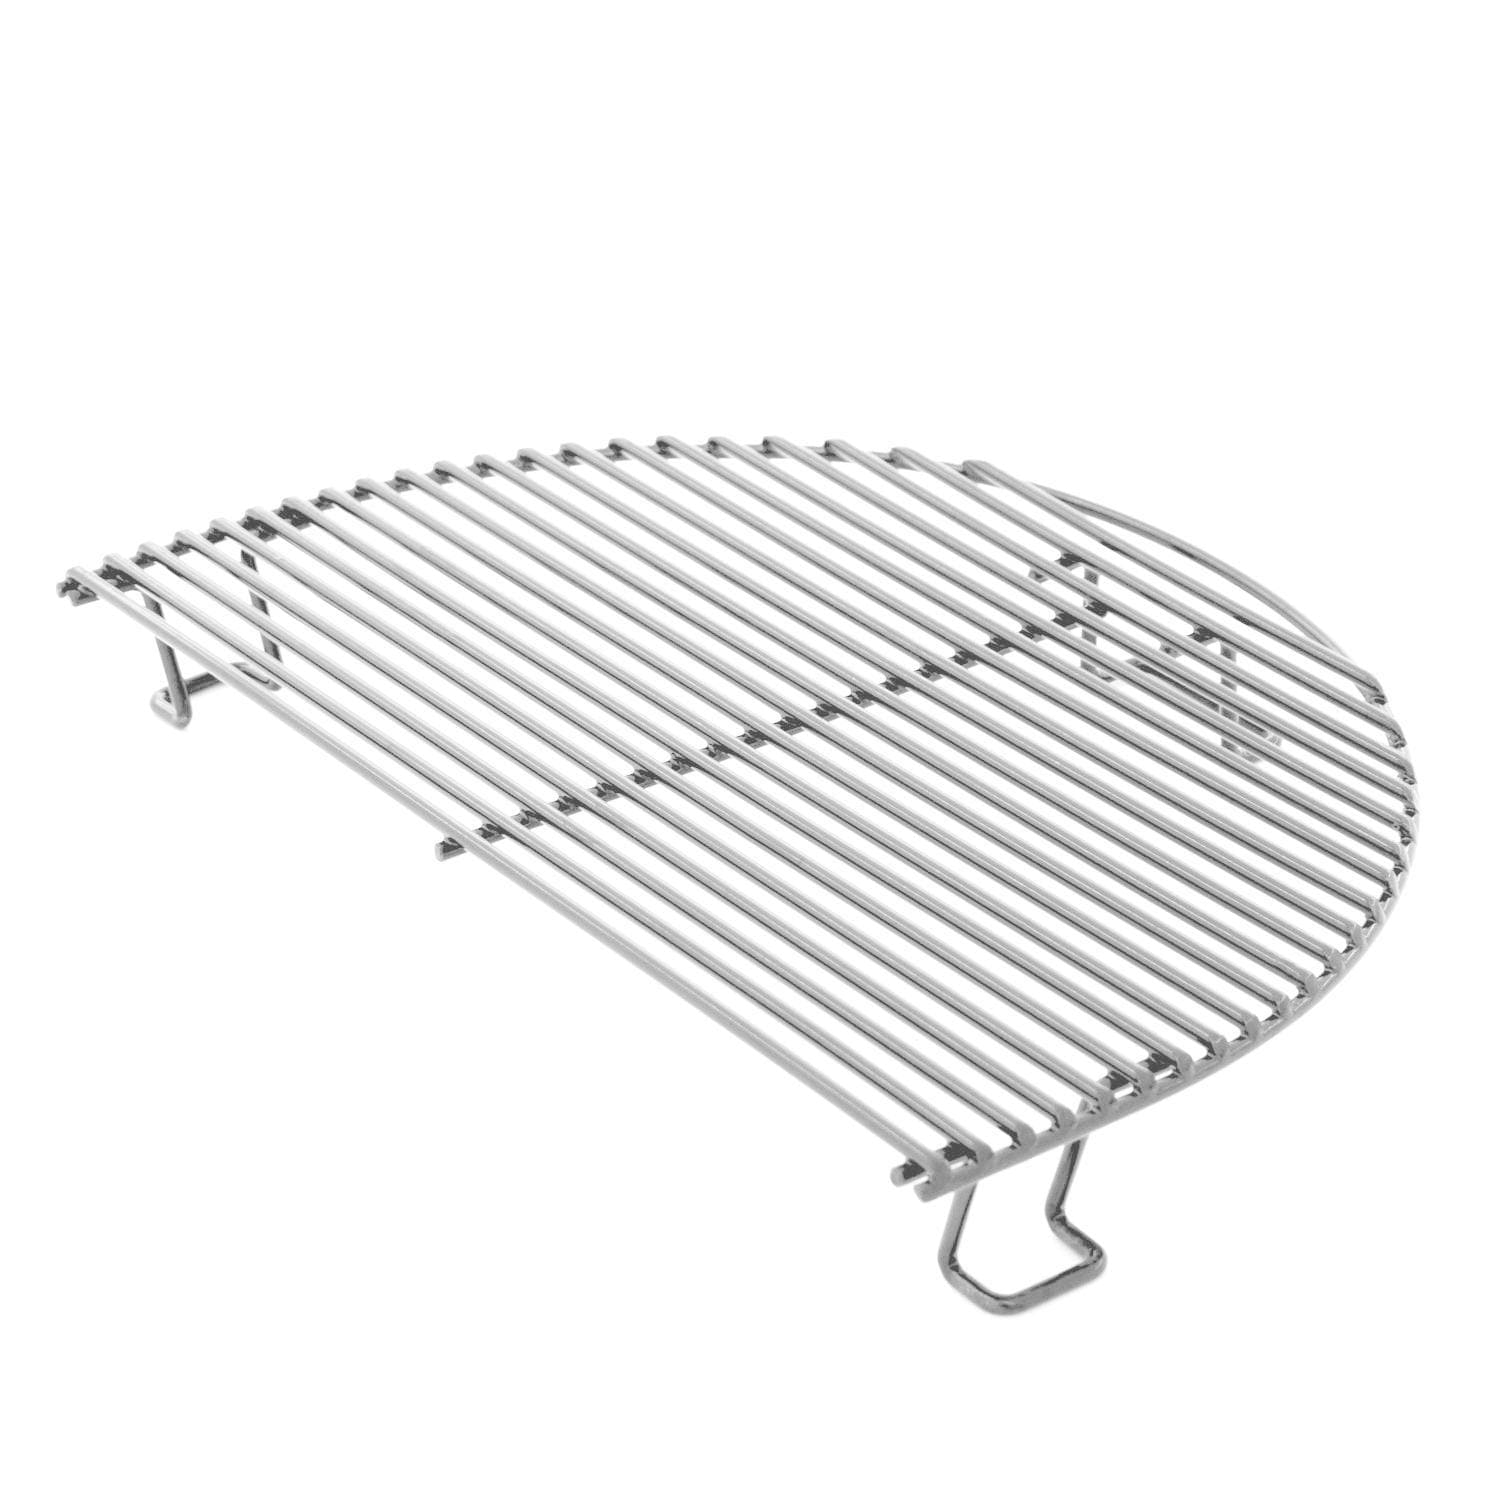 Primo Oval Junior 200 Ceramic Kamado Grill With Stainless Steel Grates - PGCJRH (2021) - image 4 of 6